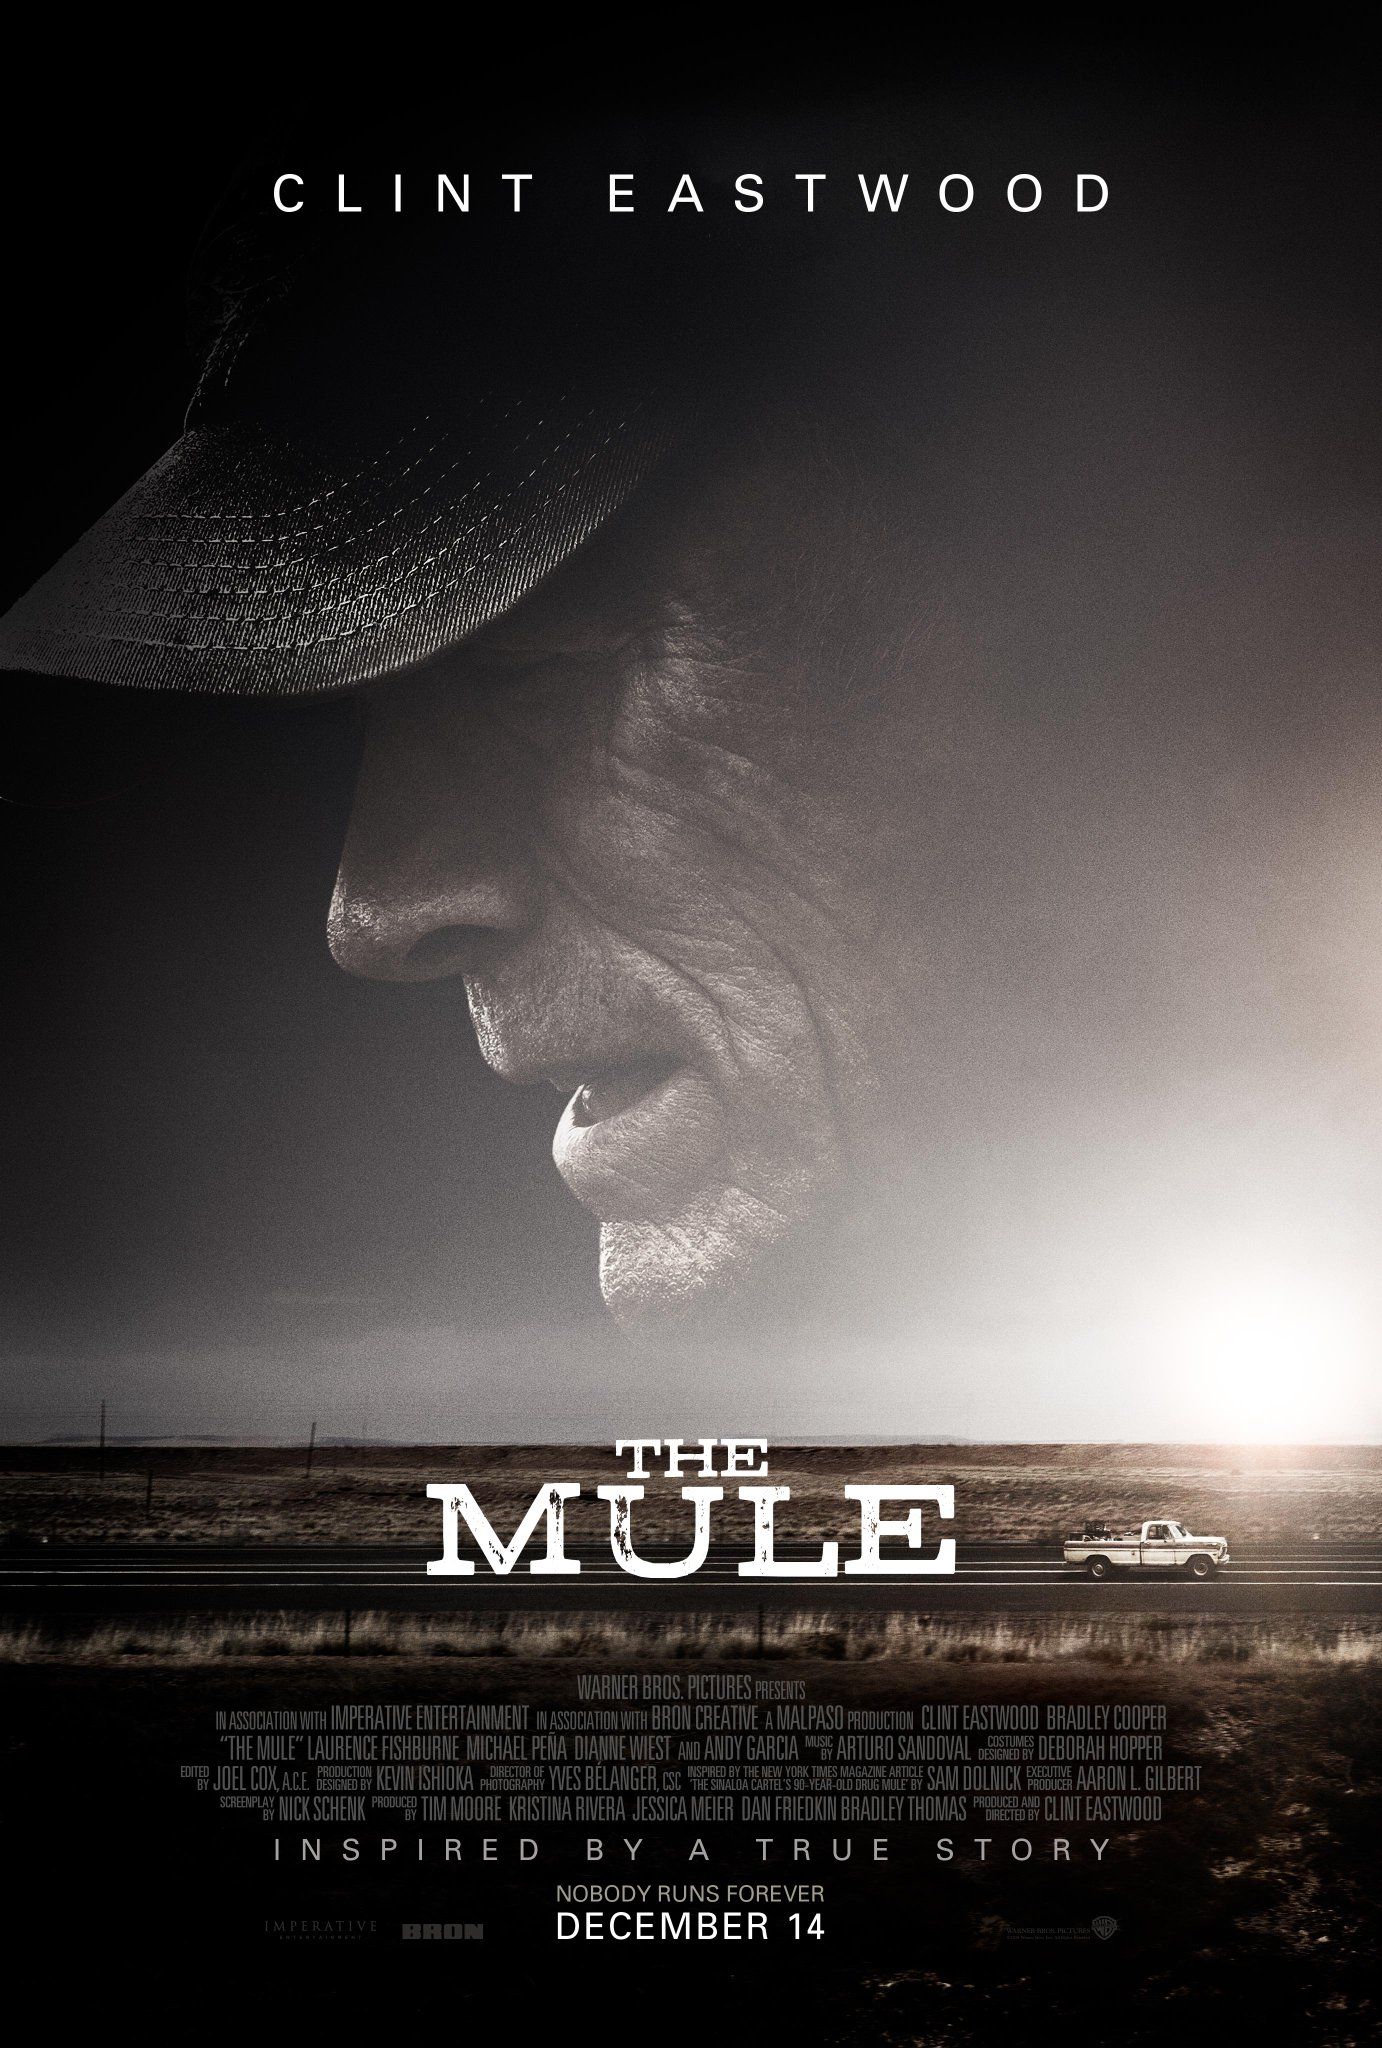 The Mule Poster Teases Clint Eastwood's New Film | Collider